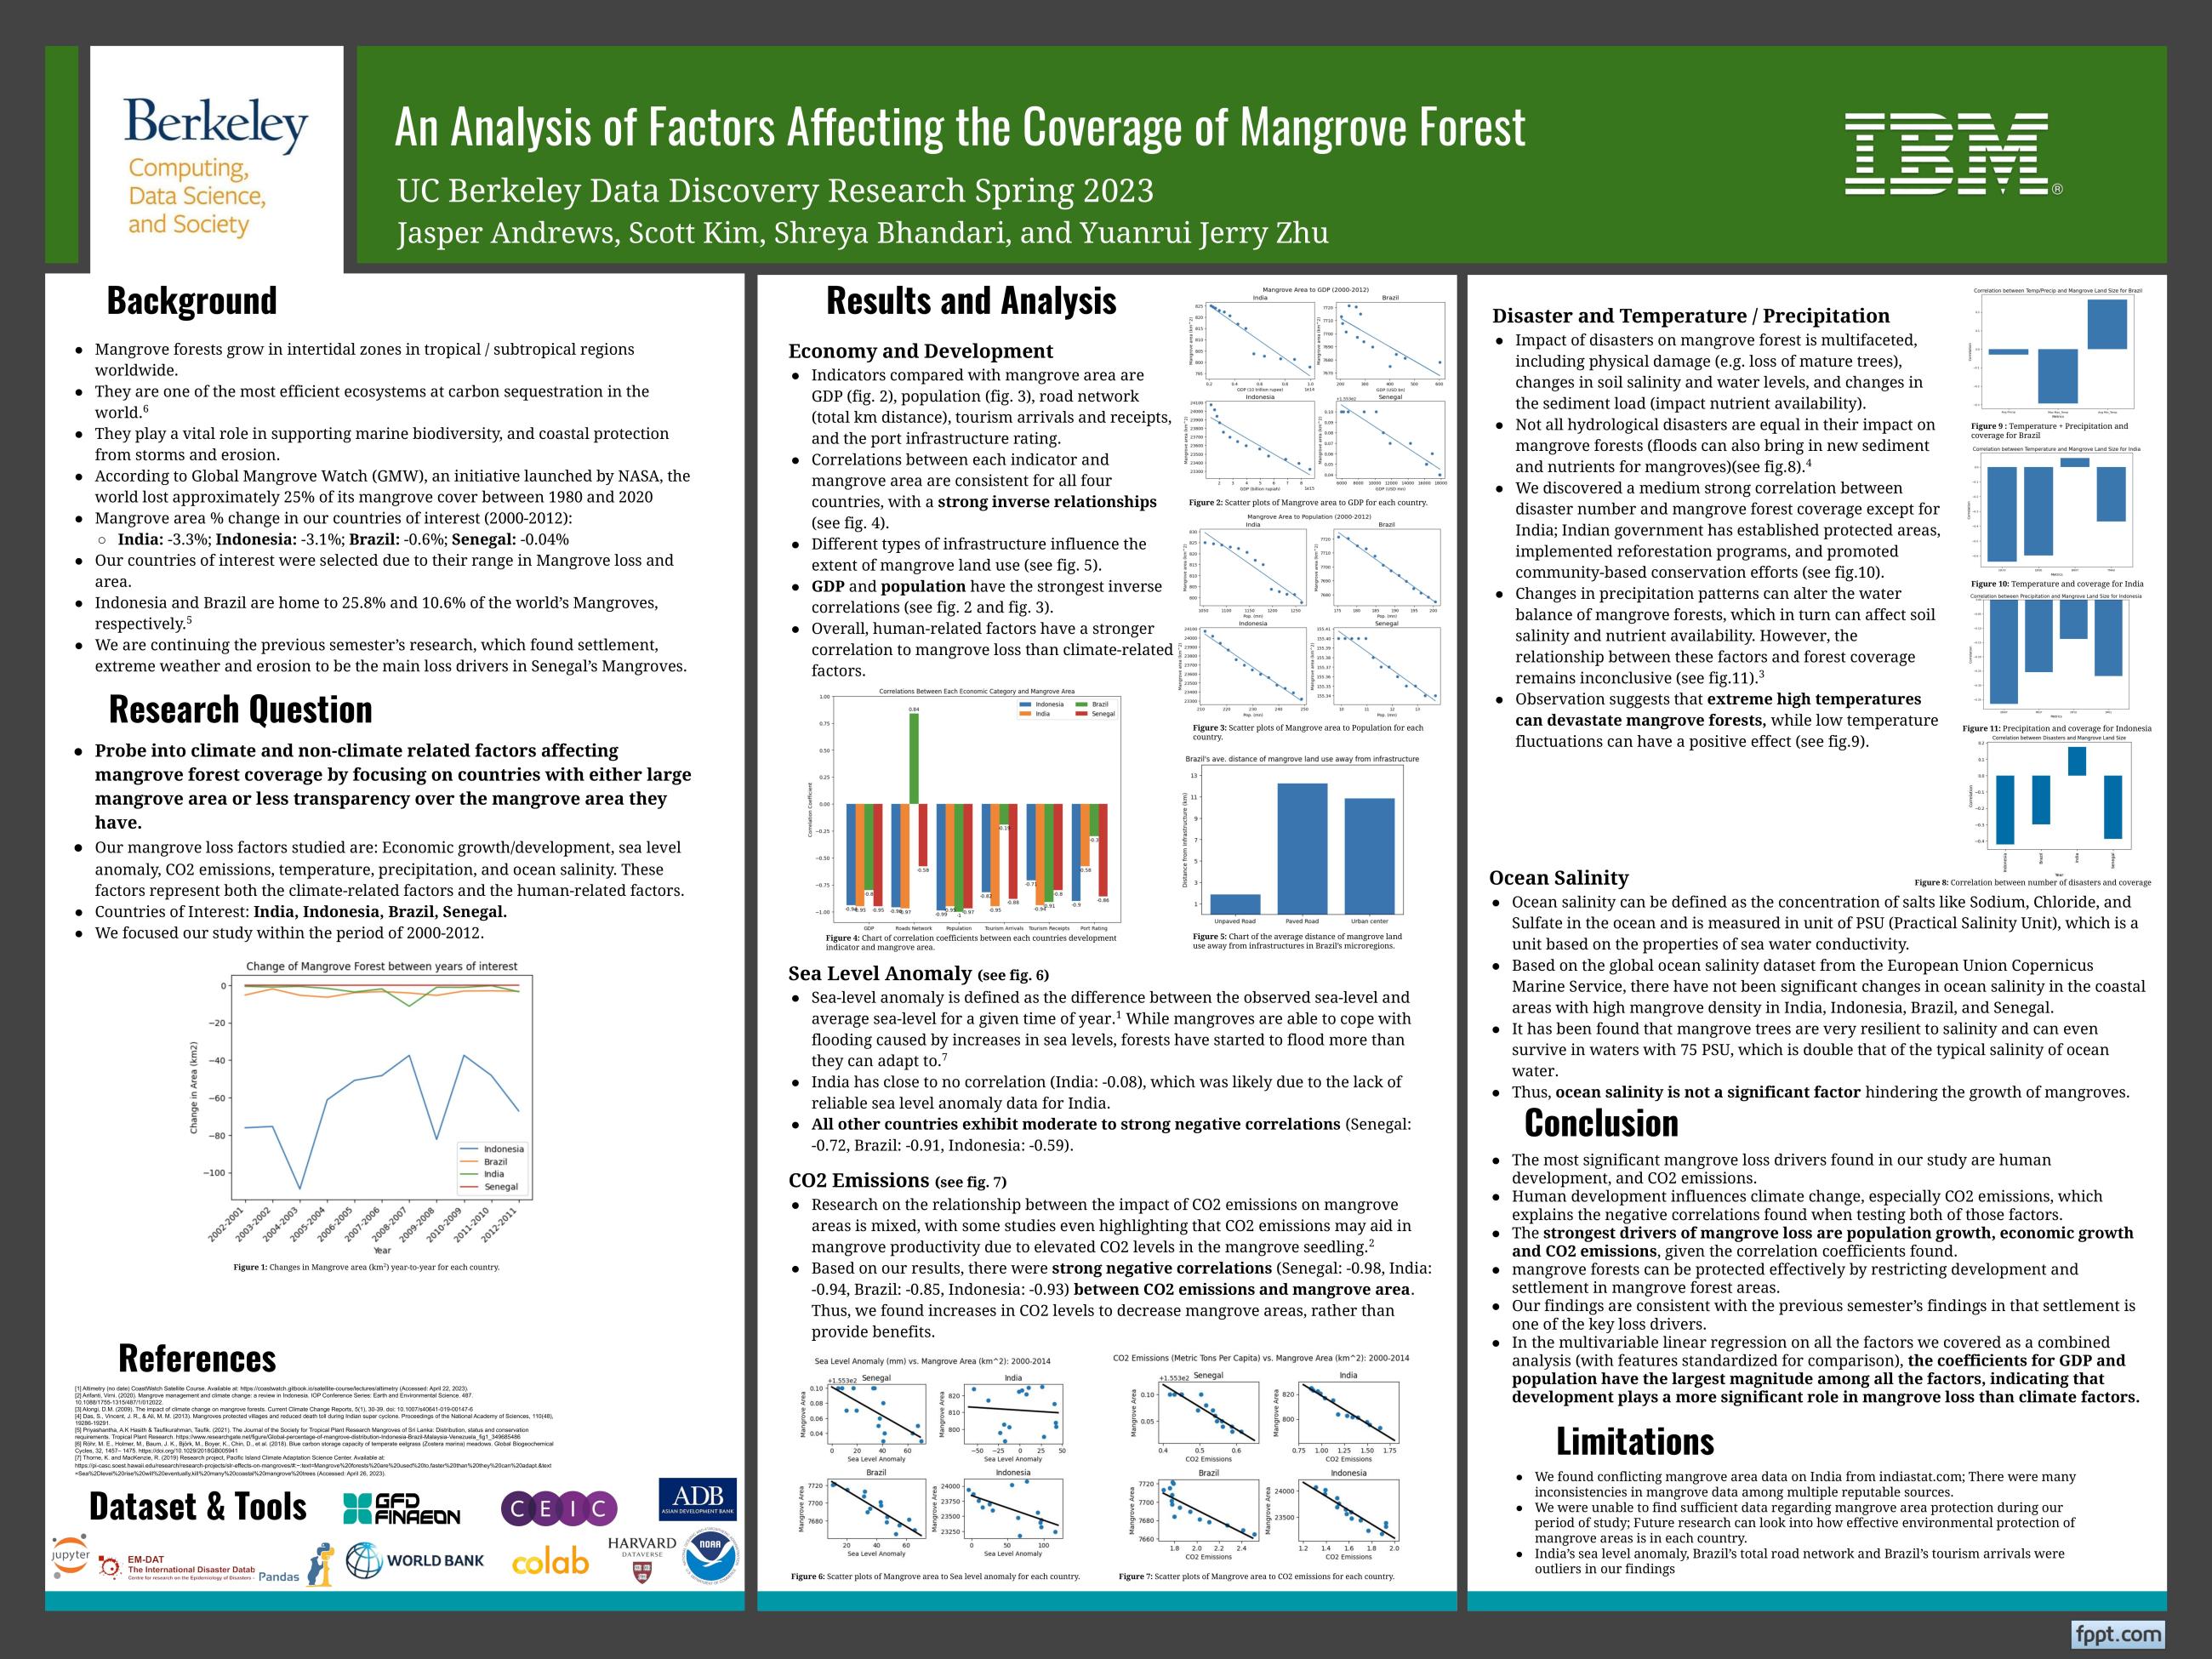 An Analysis of Factors Affecting the Coverage of Mangrove Forest - Spring 2023 Discovery Project